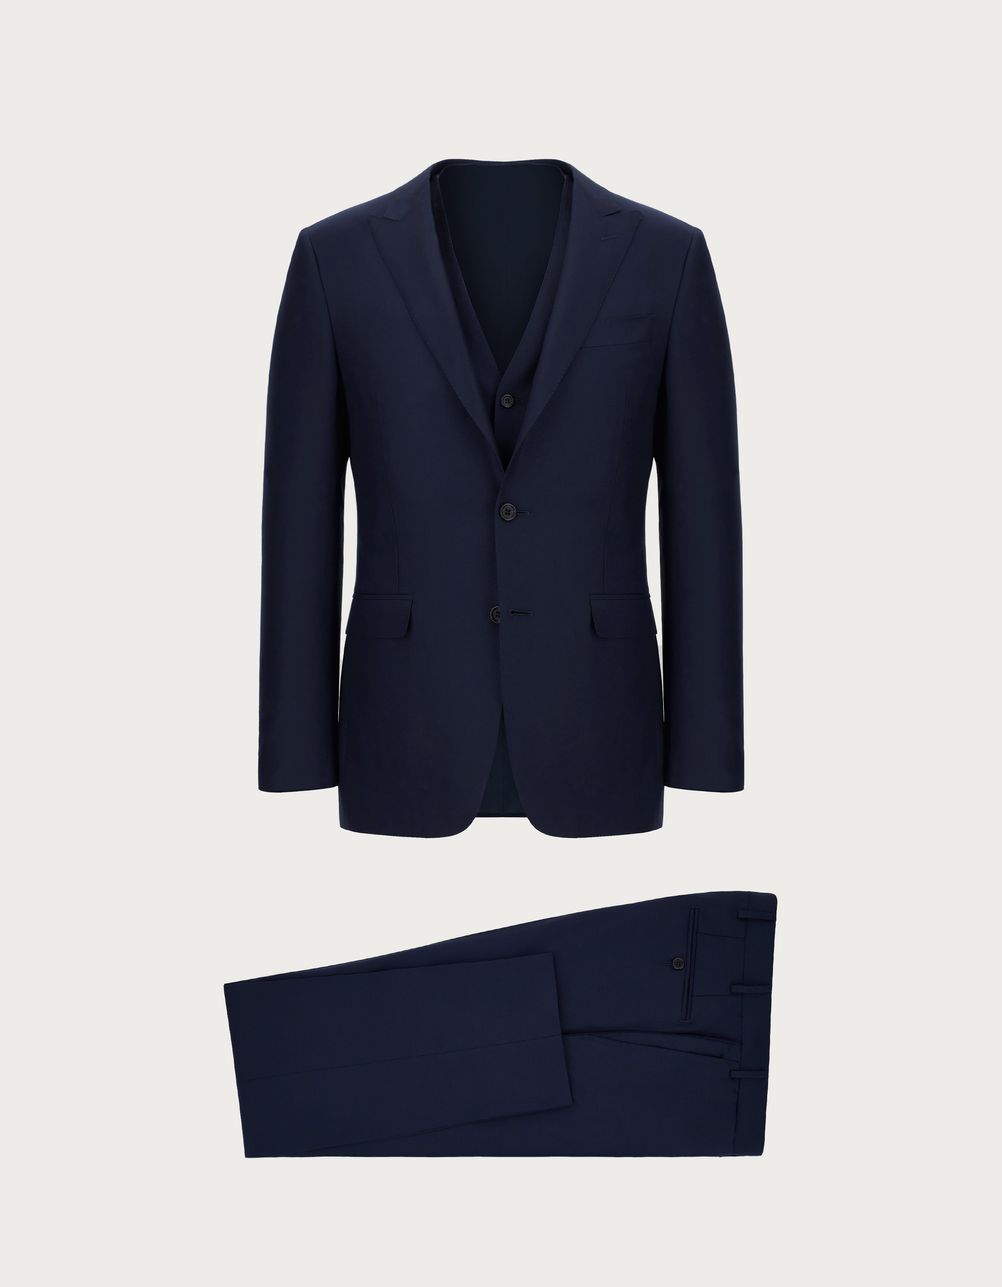 Navy blue suit with waistcoat in wool